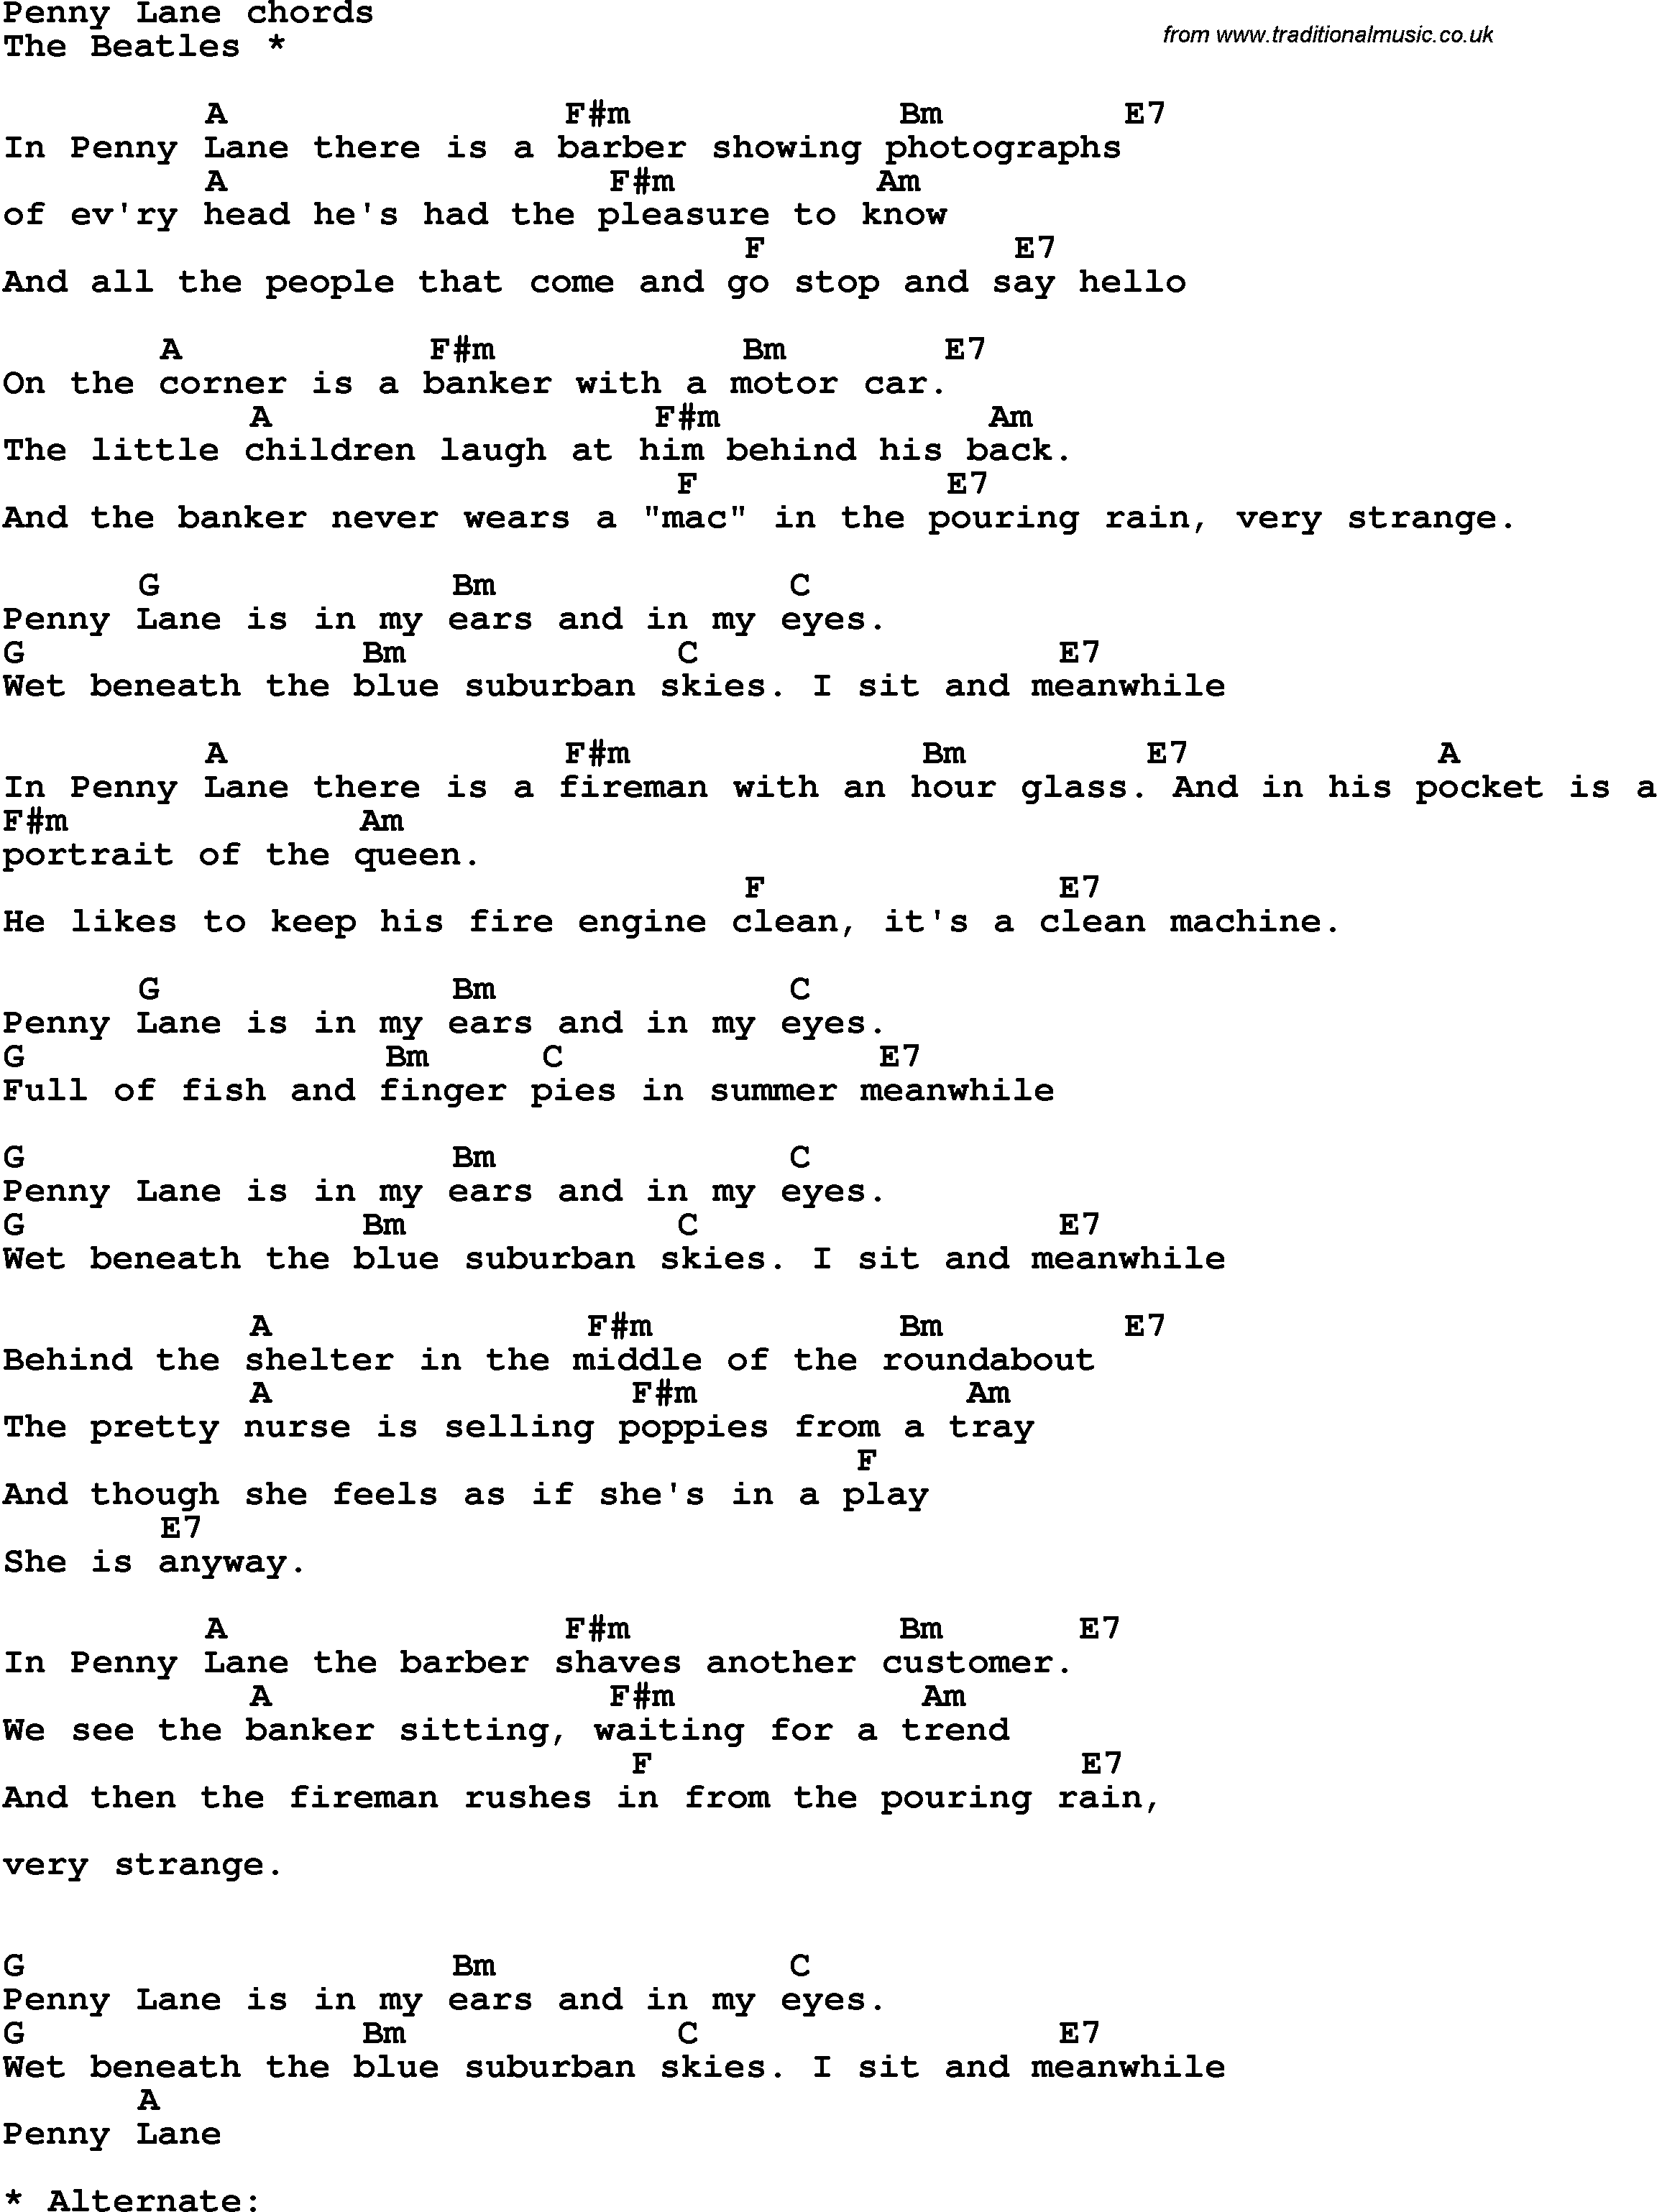 Song Lyrics with guitar chords for Penny Lane - The Beatles